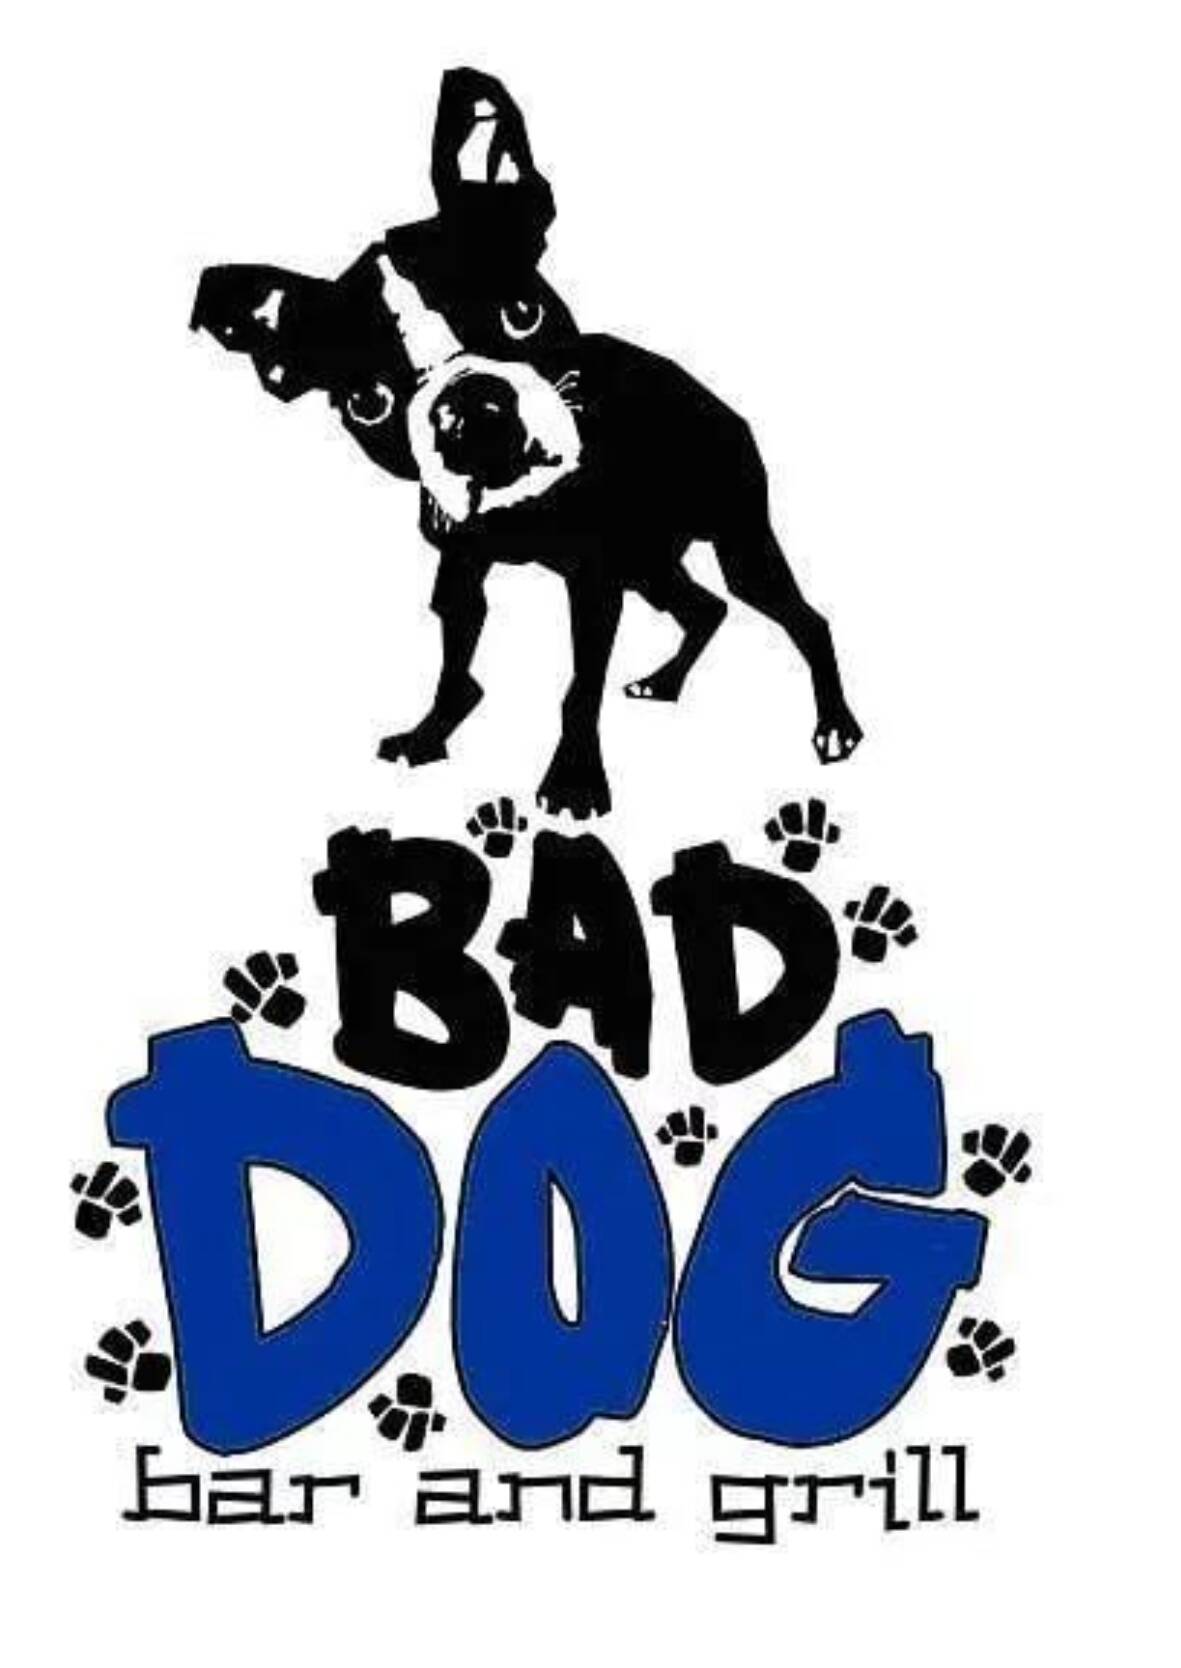 Bad Dogs Bar & Grill